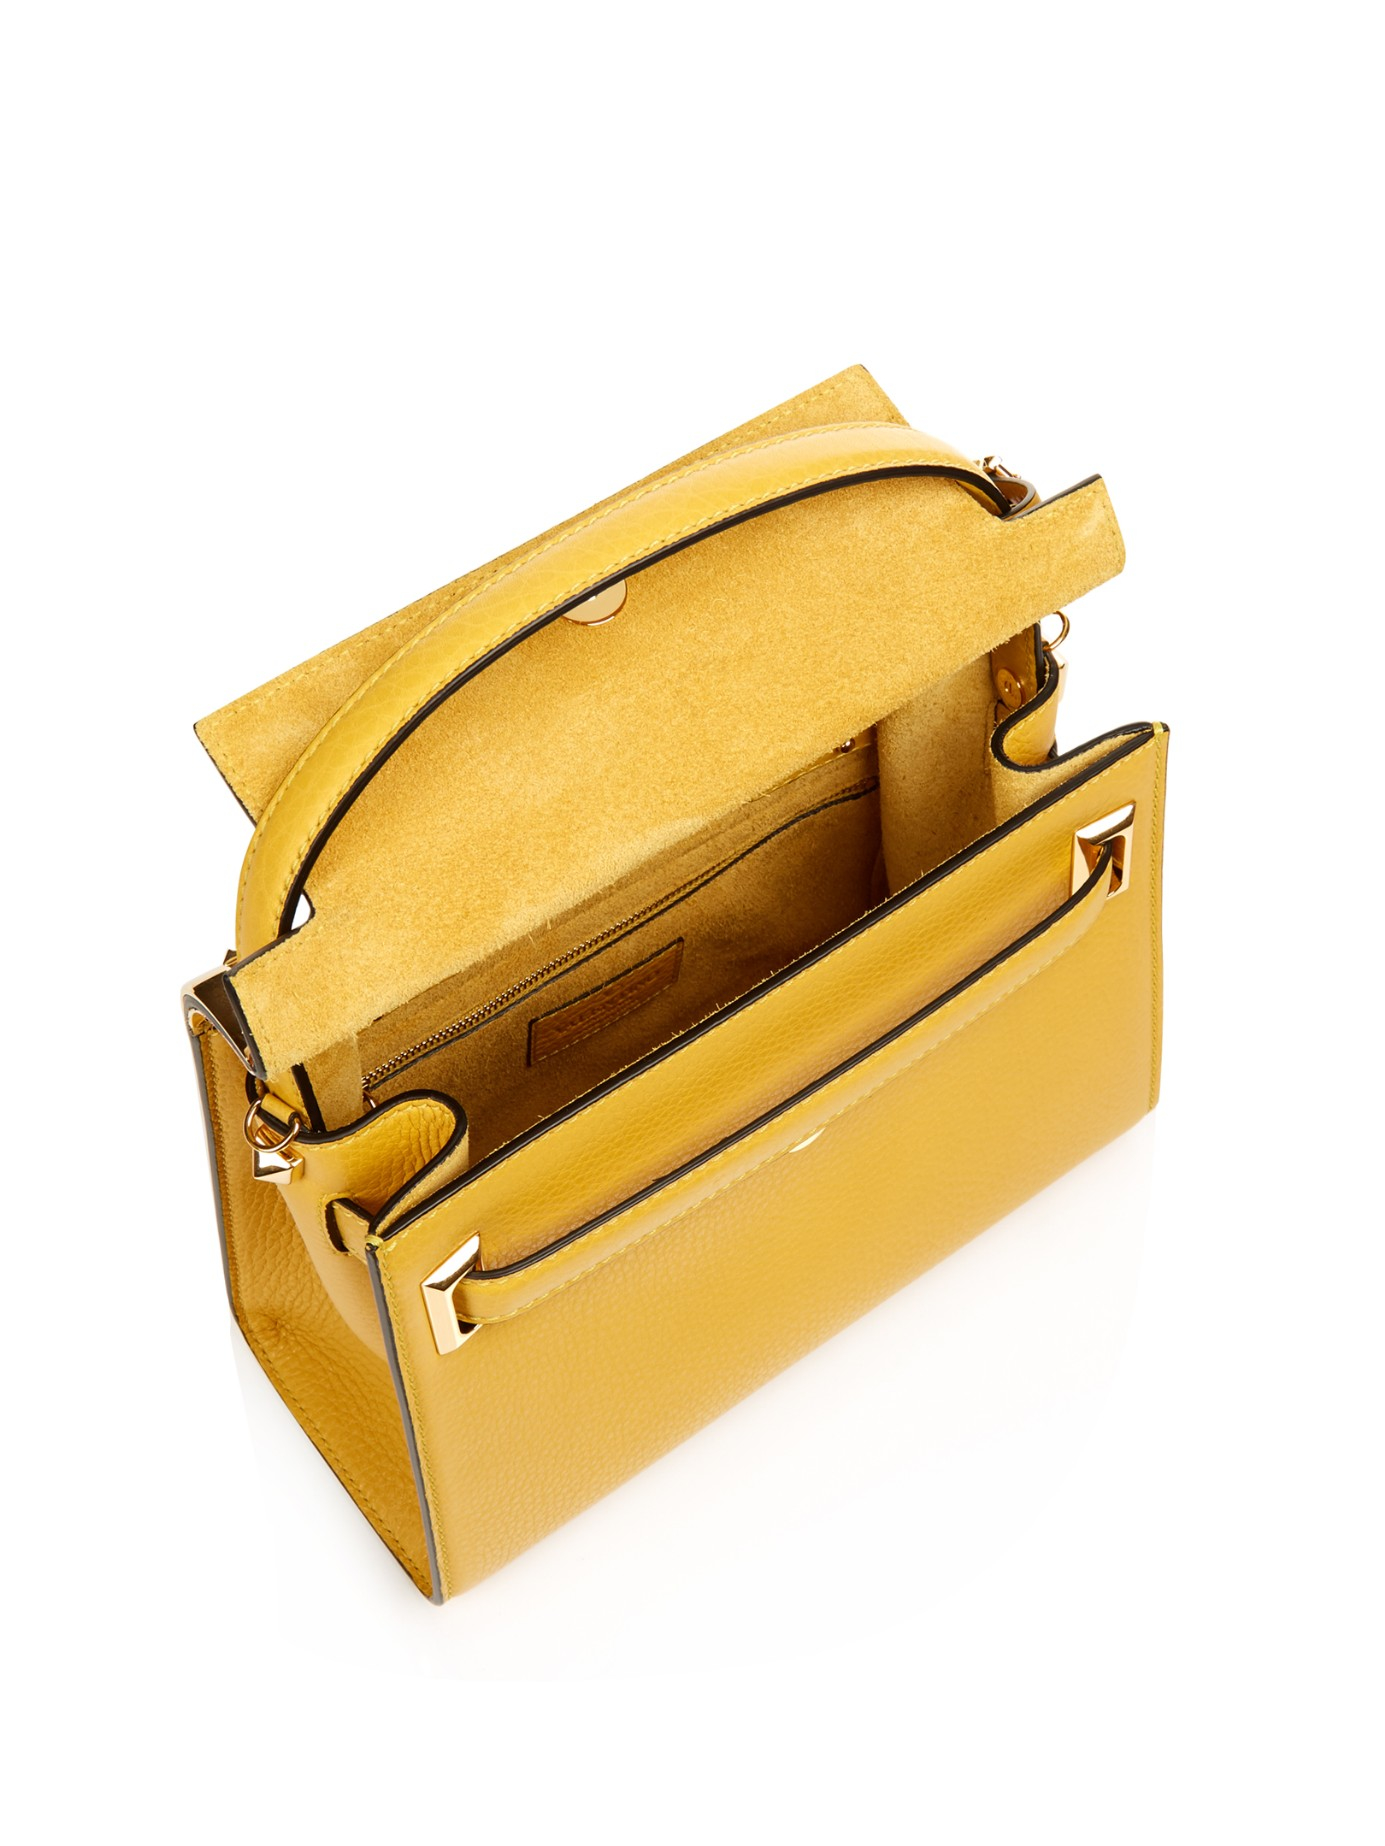 Valentino My Rockstud Small Leather Bag in Yellow - Lyst